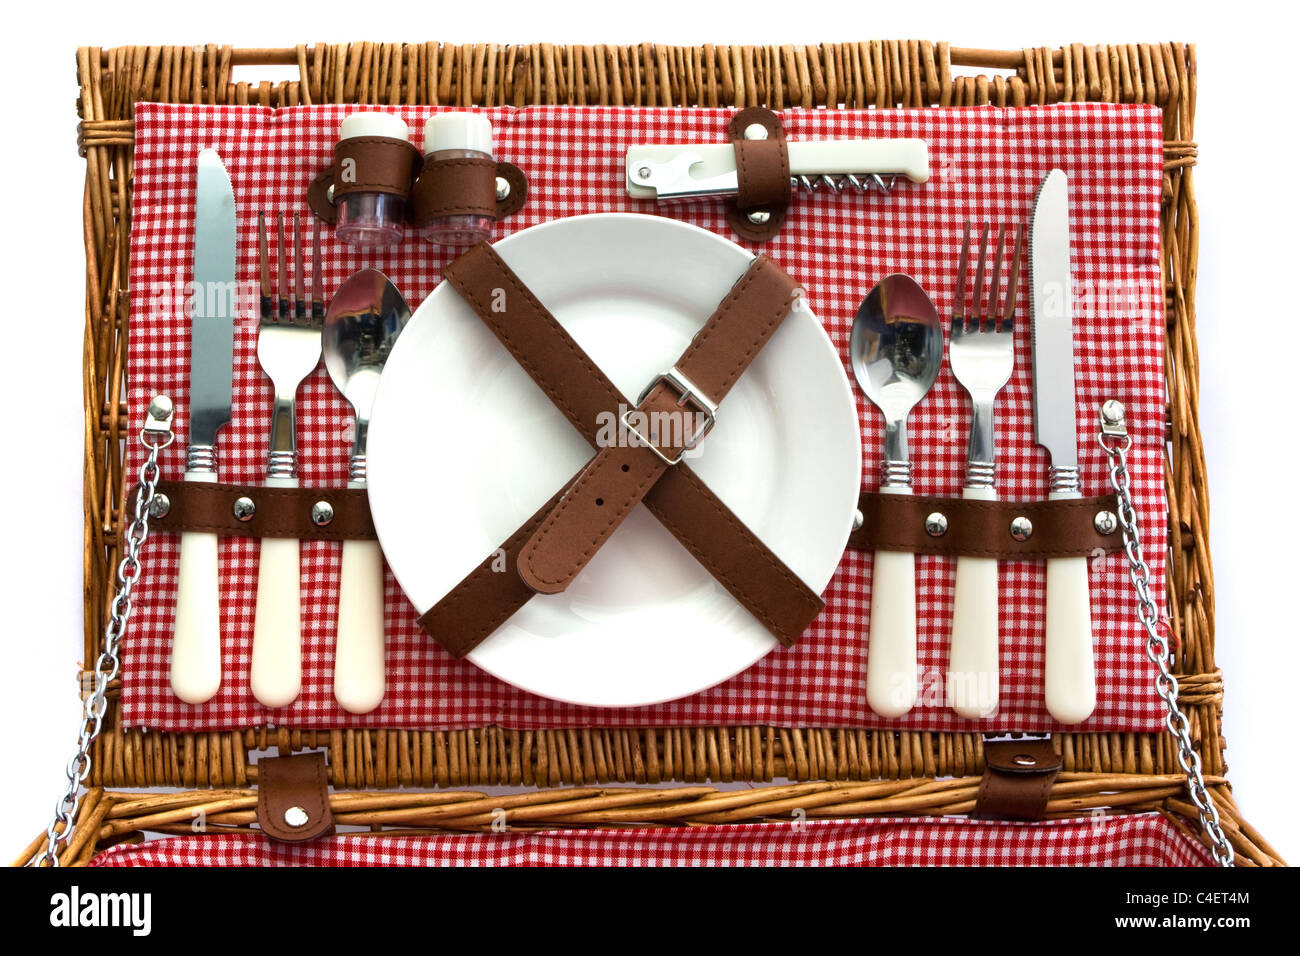 Old fasioned wicker picnic basket with cutlery Stock Photo